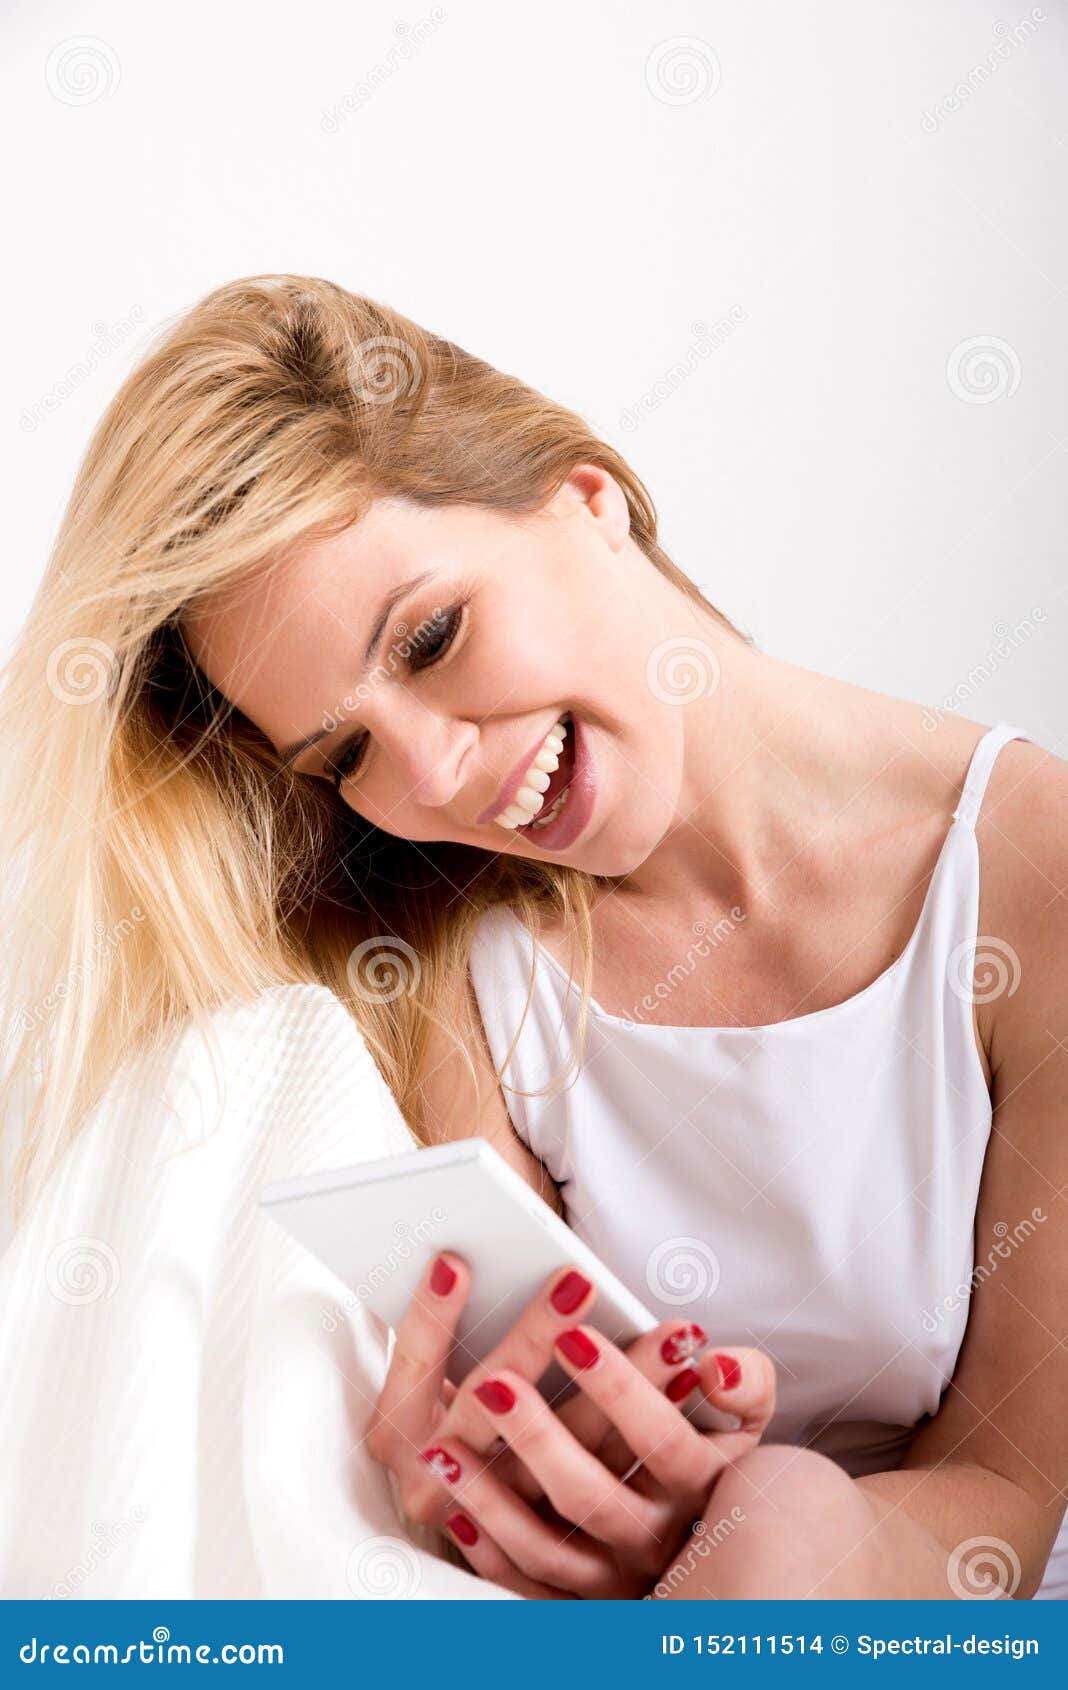 https://thumbs.dreamstime.com/z/young-woman-sitting-bed-taking-selfie-beautiful-young-woman-sitting-bed-white-tank-top-taking-152111514.jpg